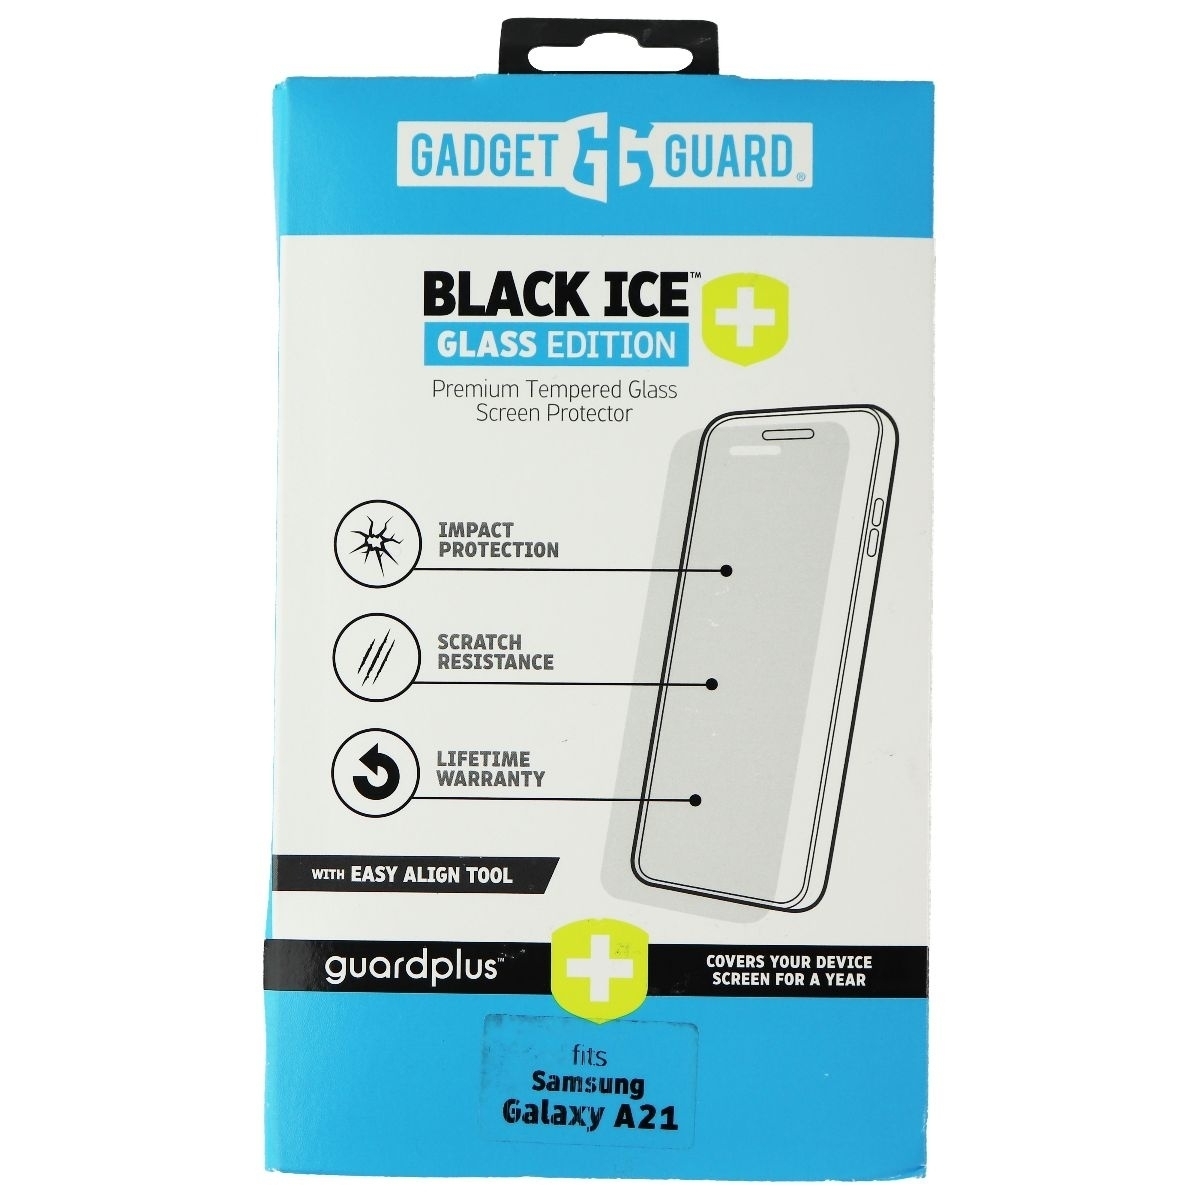 Gadget Guard Black Ice+ (Plus) Glass Edition For Samsung Galaxy A21 - Clear